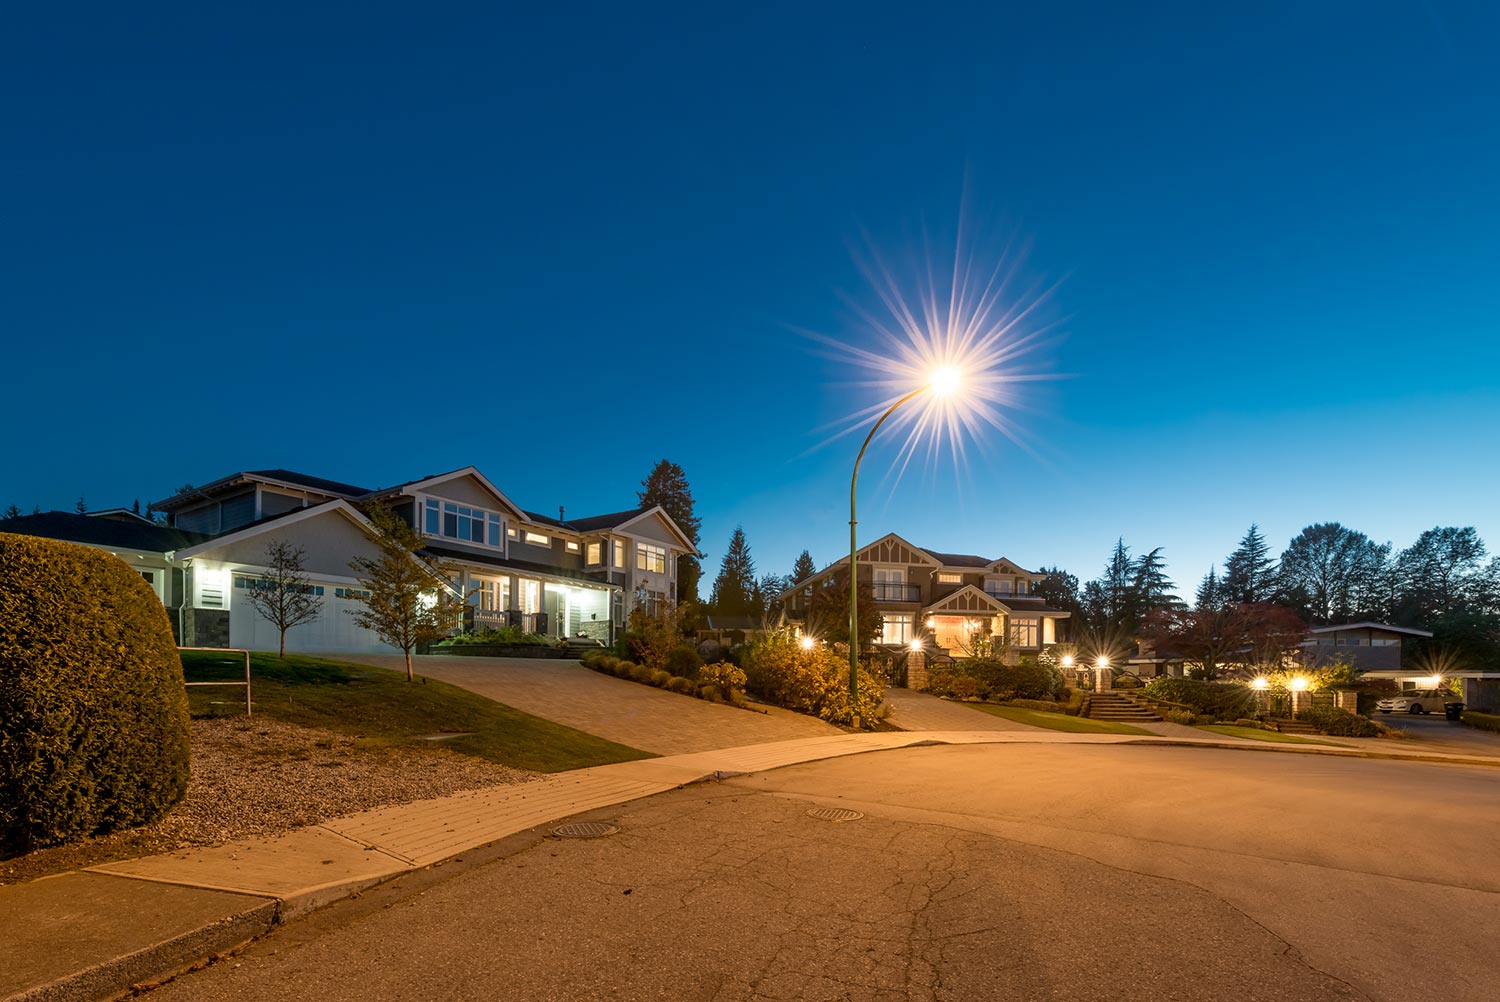 Luxury houses with nicely paved doorway at dusk